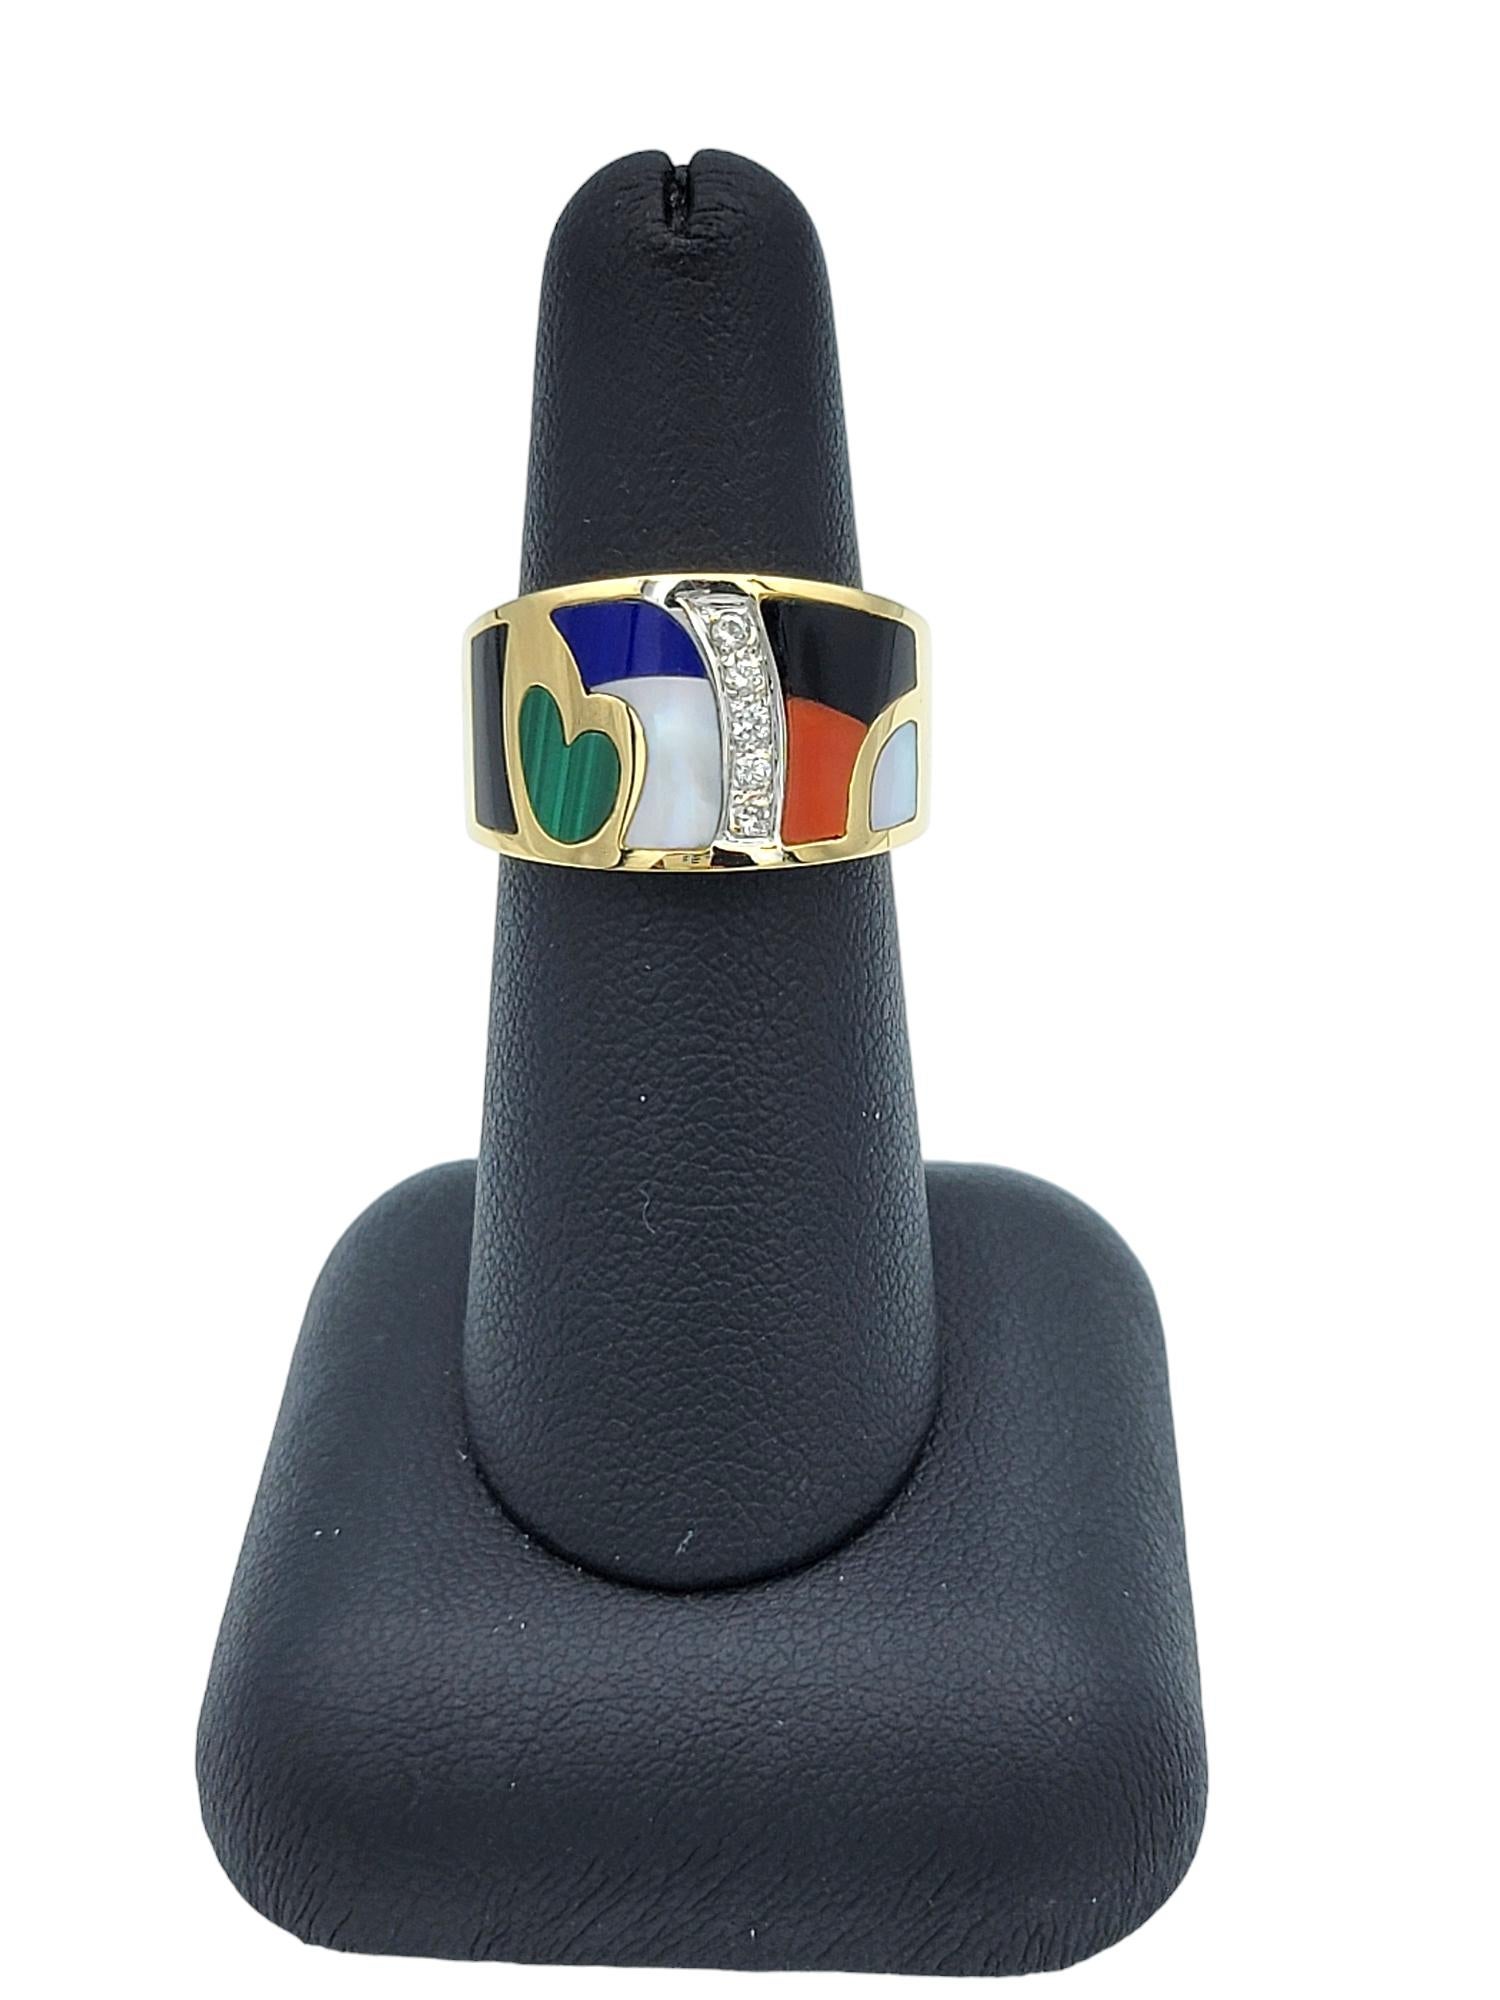 Asch Grossbardt Diamond and Multi Gem Inlay Wide Band Ring Set in 18 Karat Gold For Sale 3